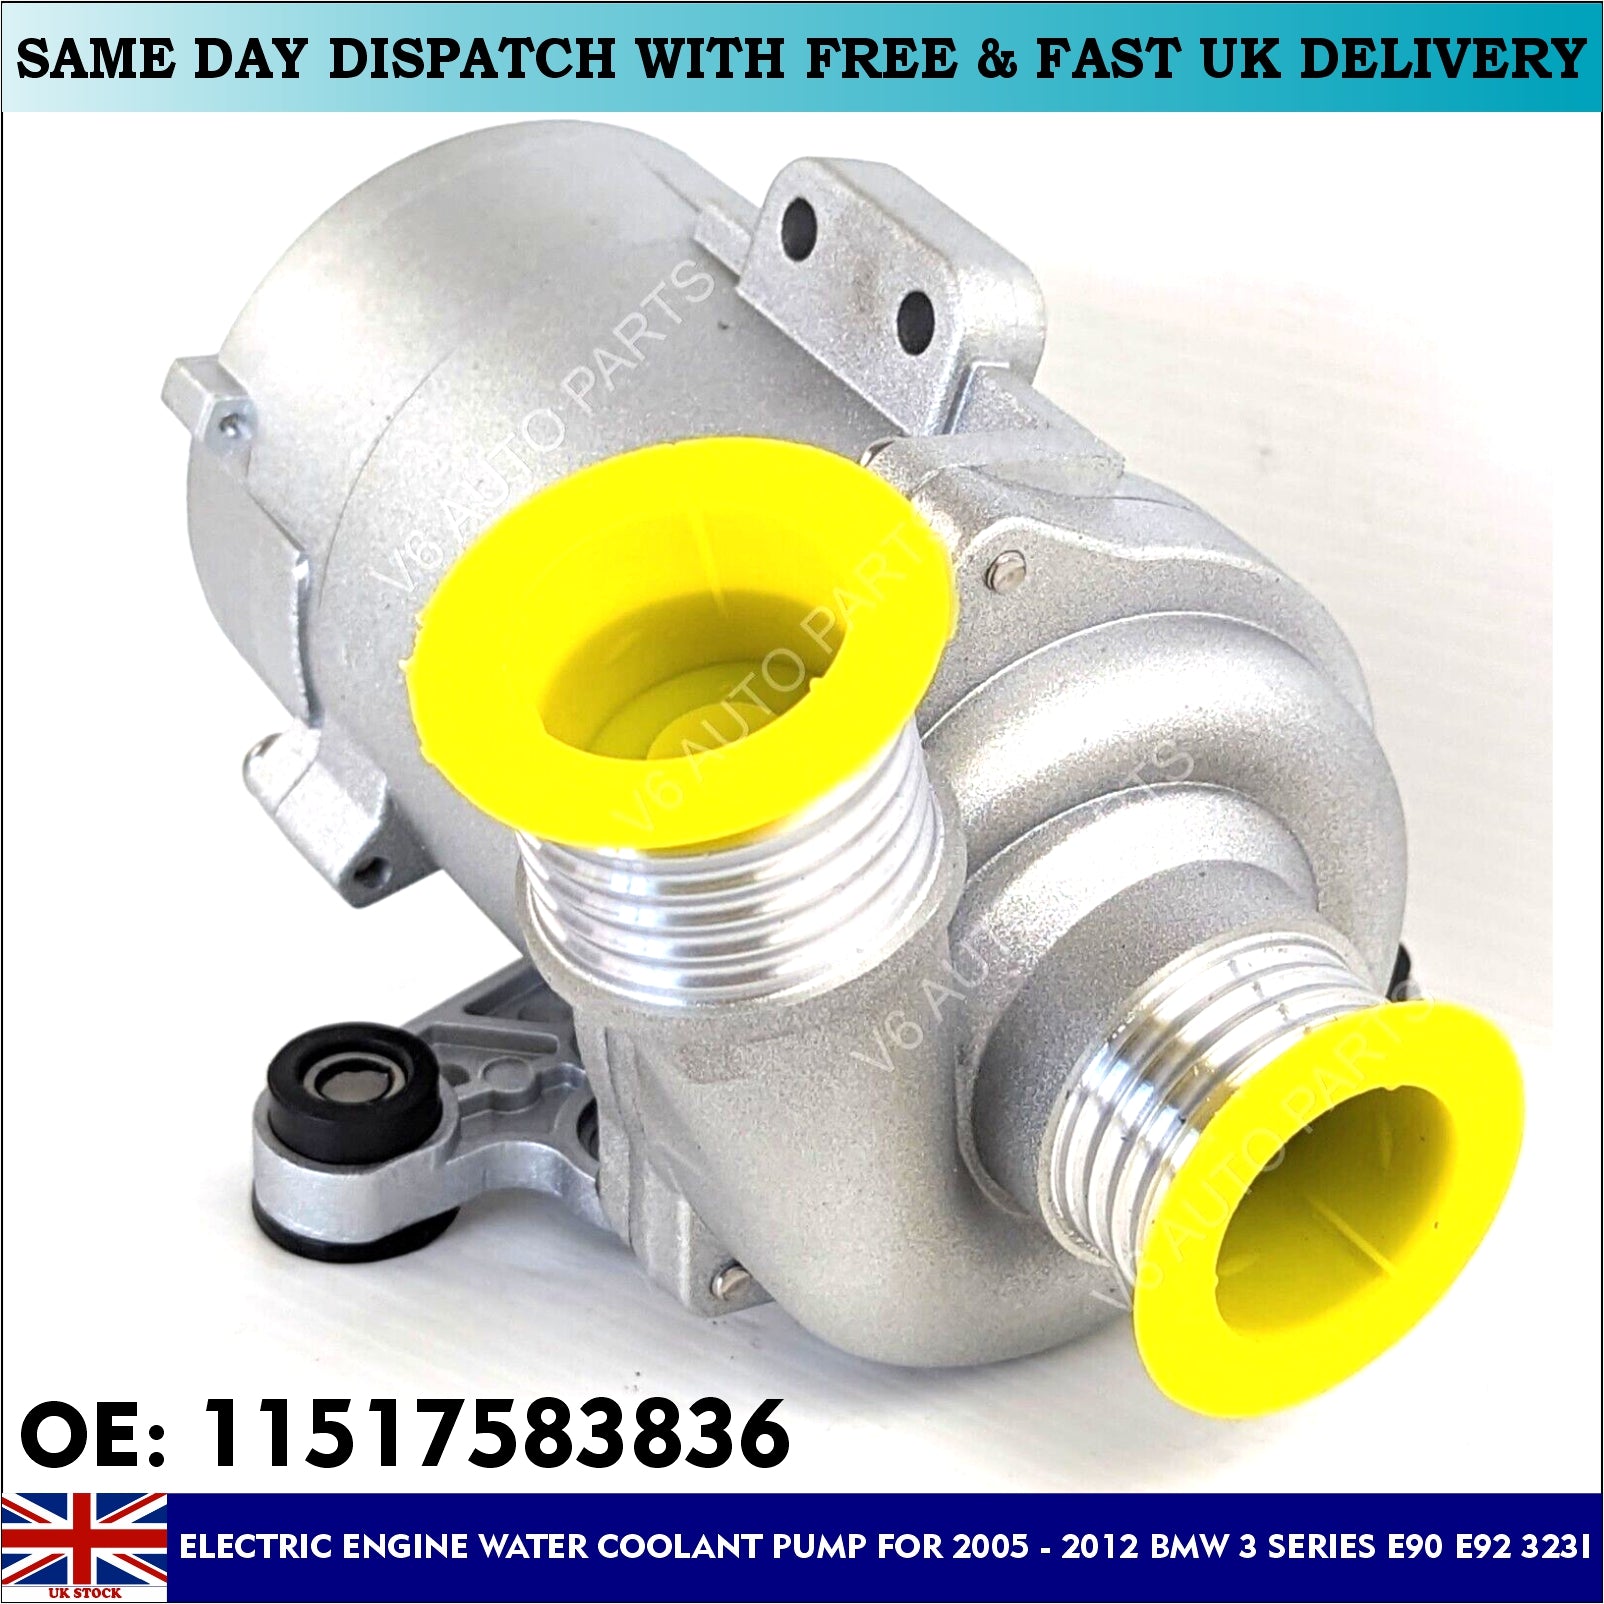 11517583836 	Engine Water Coolant Electric Pump For 2008 To 2015 BMW 7 (F01, F02, F03, F04)